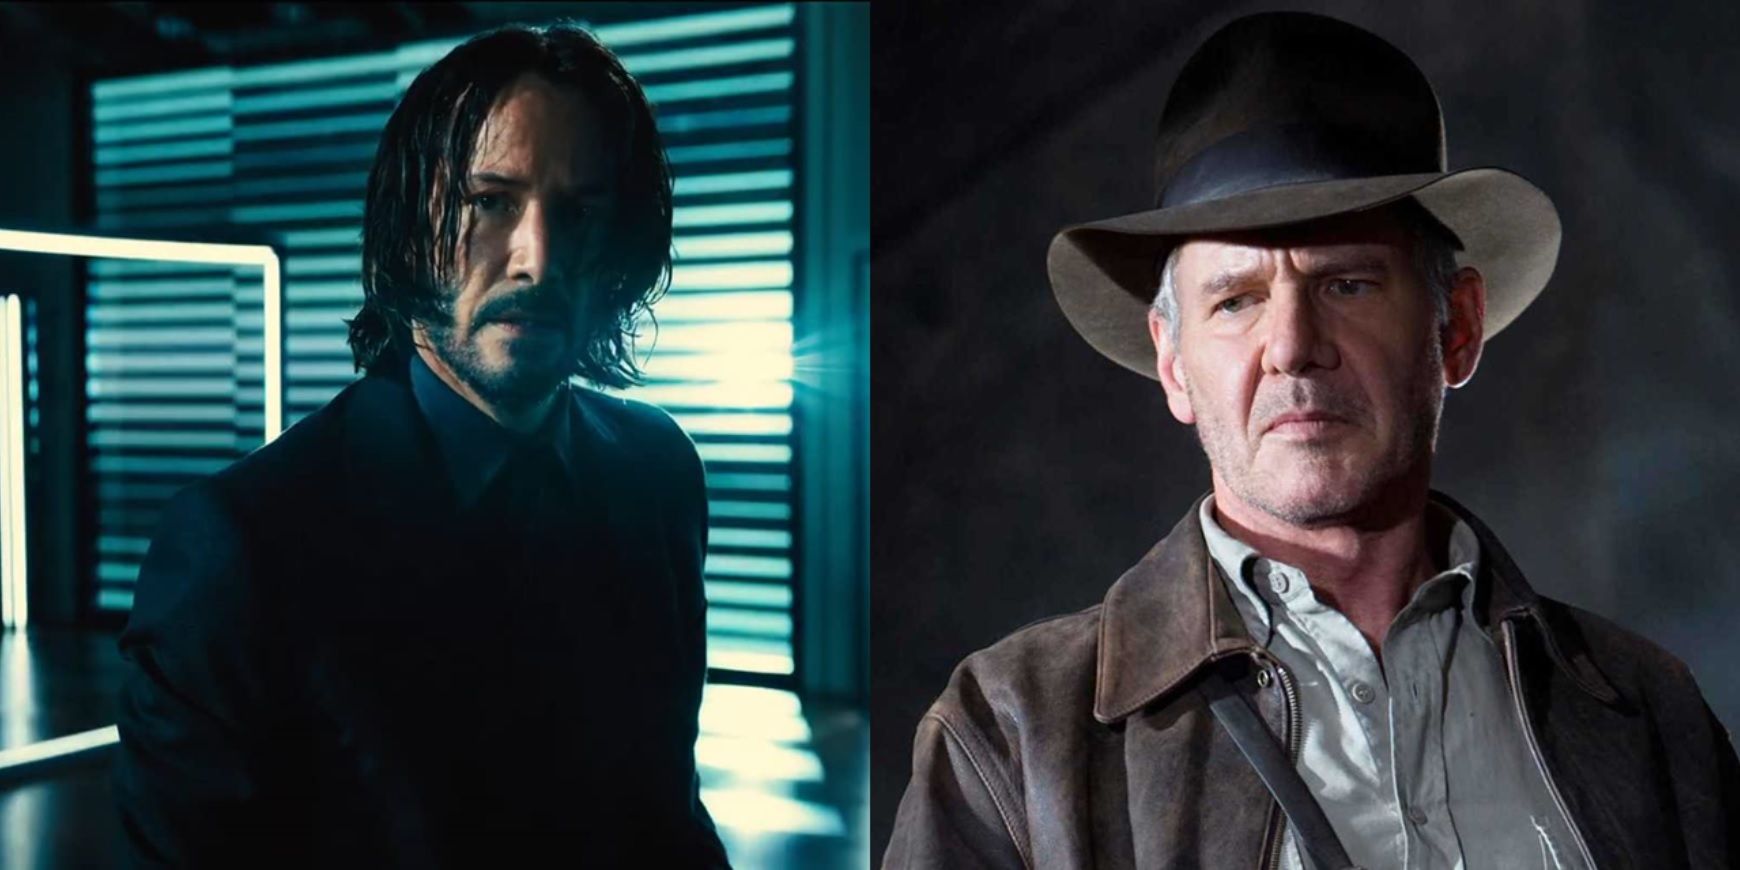 Movies coming out in 2023: from Indiana Jones to John Wick